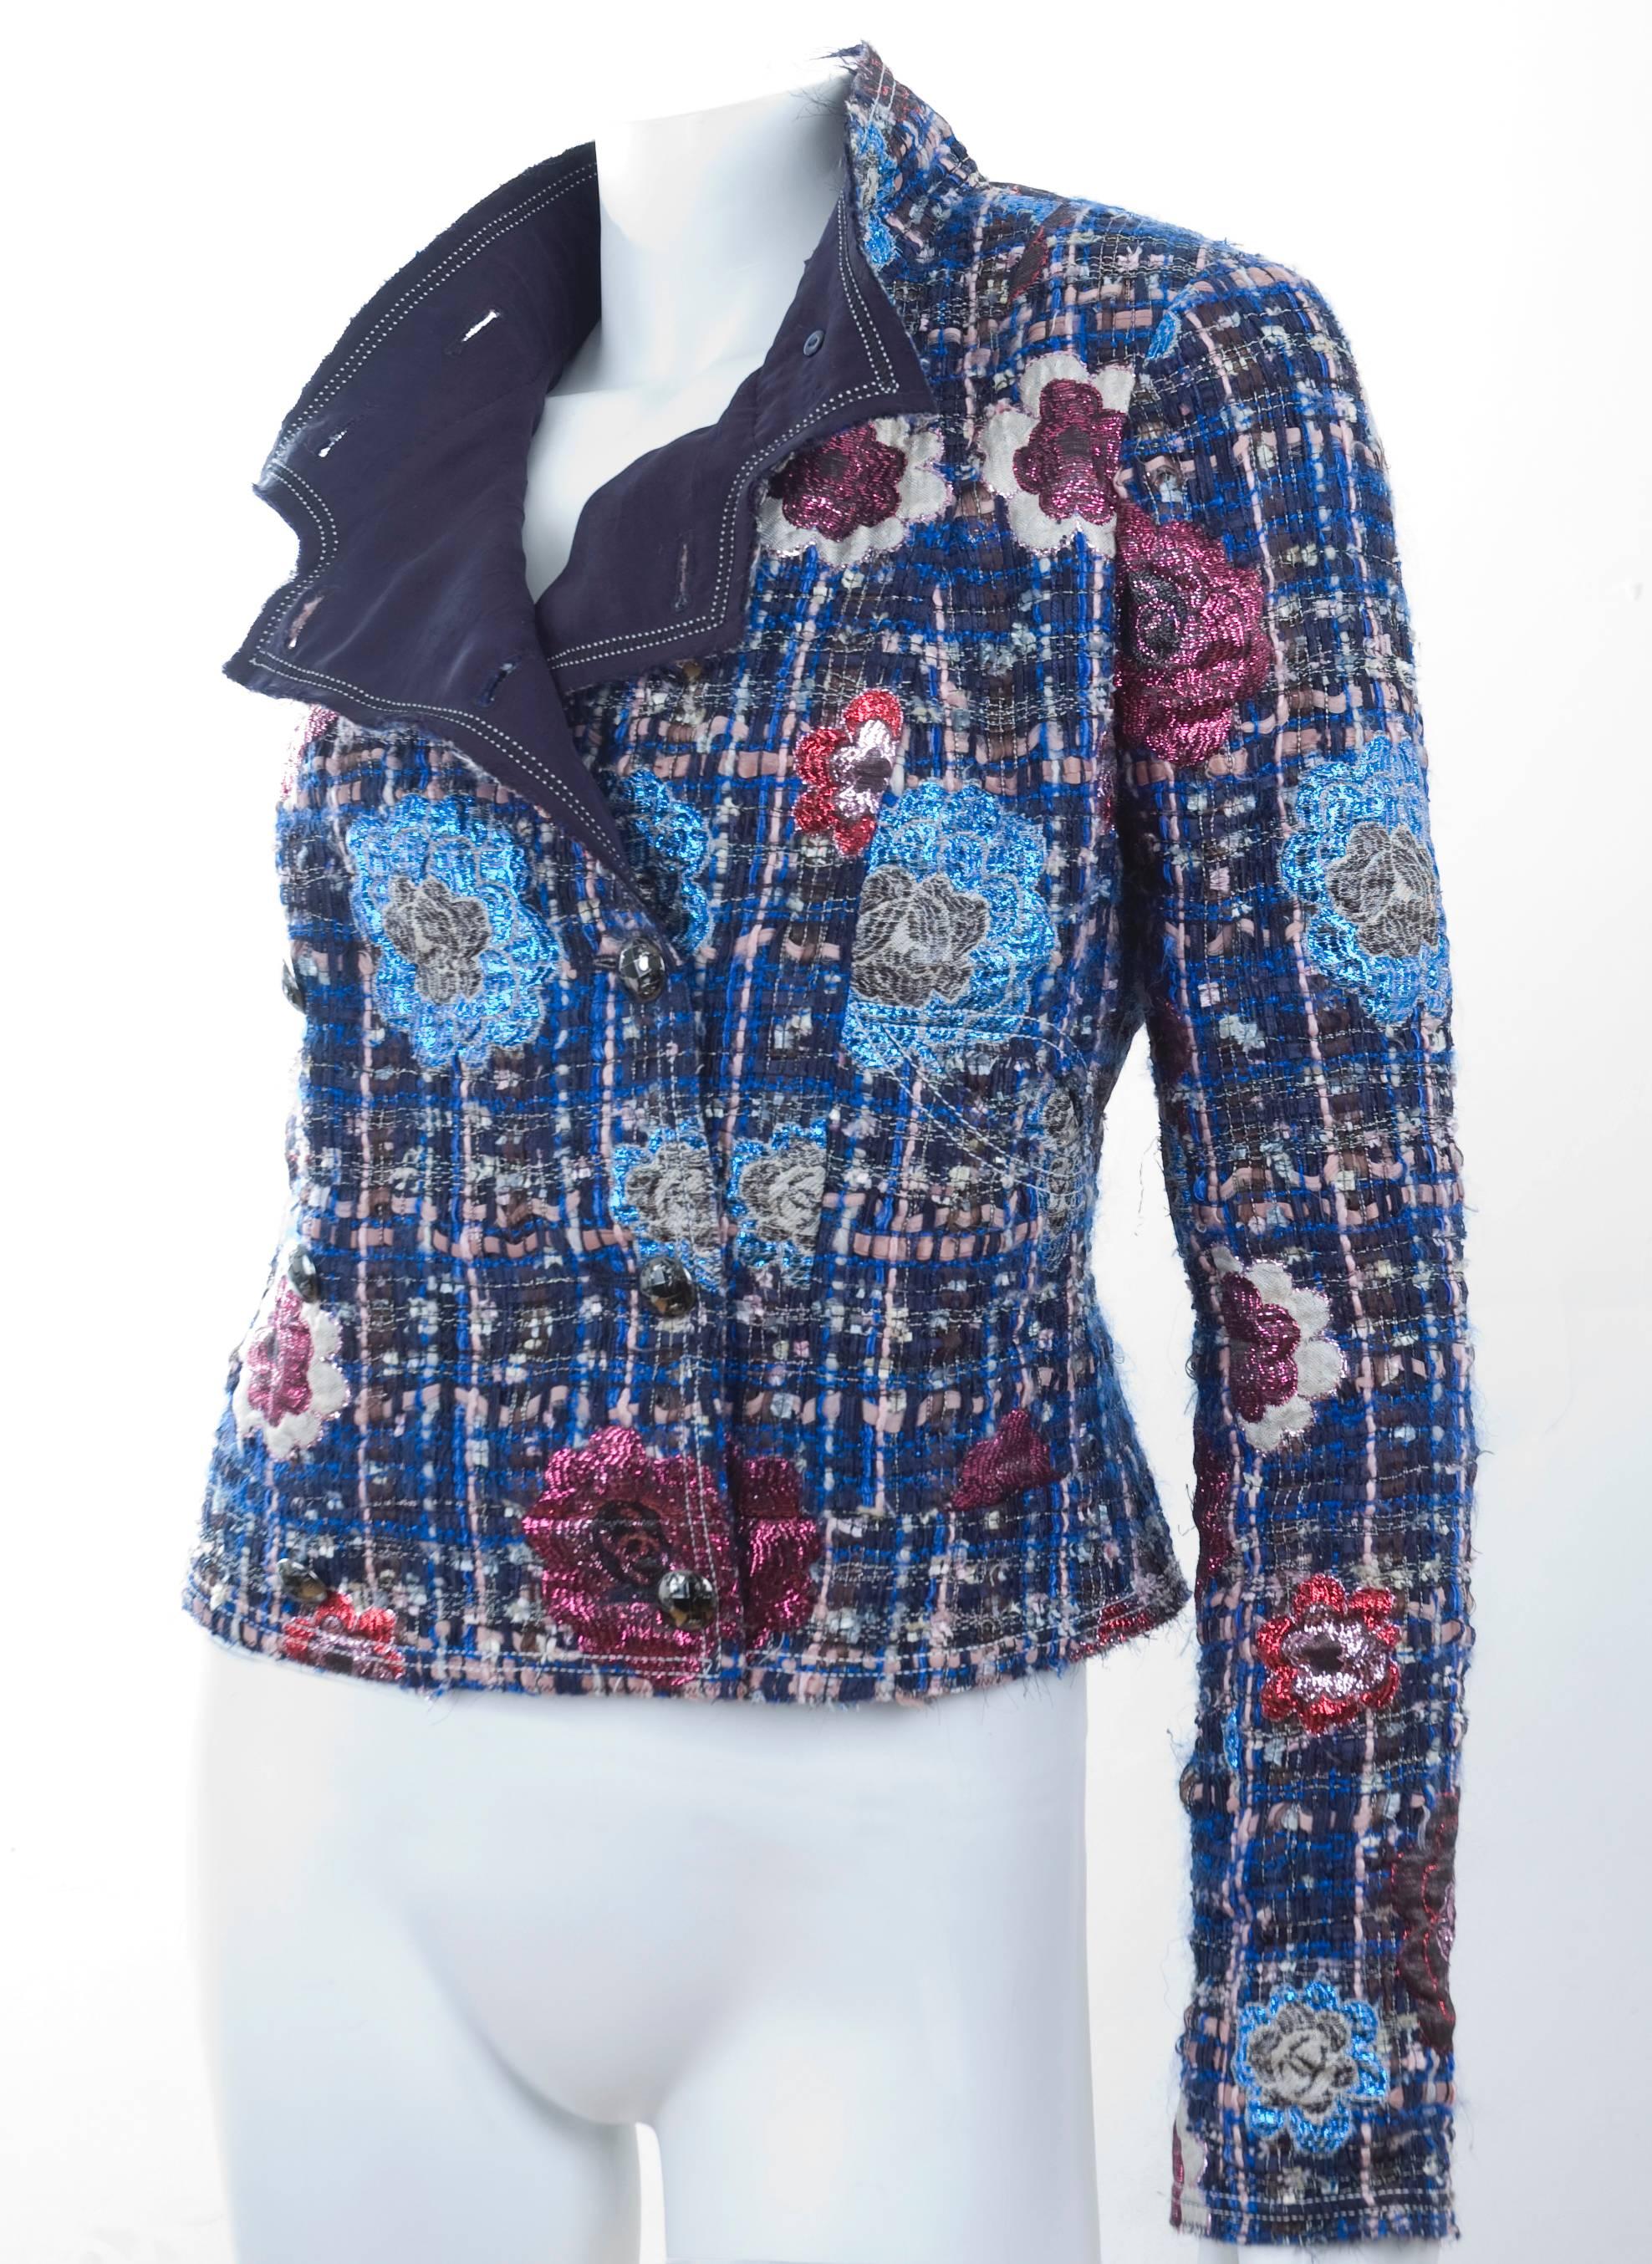 Chanel Jacket in blue and pink bouclé fabric and metallic camellias. Raw edges and lining in navy silk. Buttons in silver and black with CC logo and world-map.  Size 36 EU
Retail was 5300 Euros.
Excellent condition - no flaws to